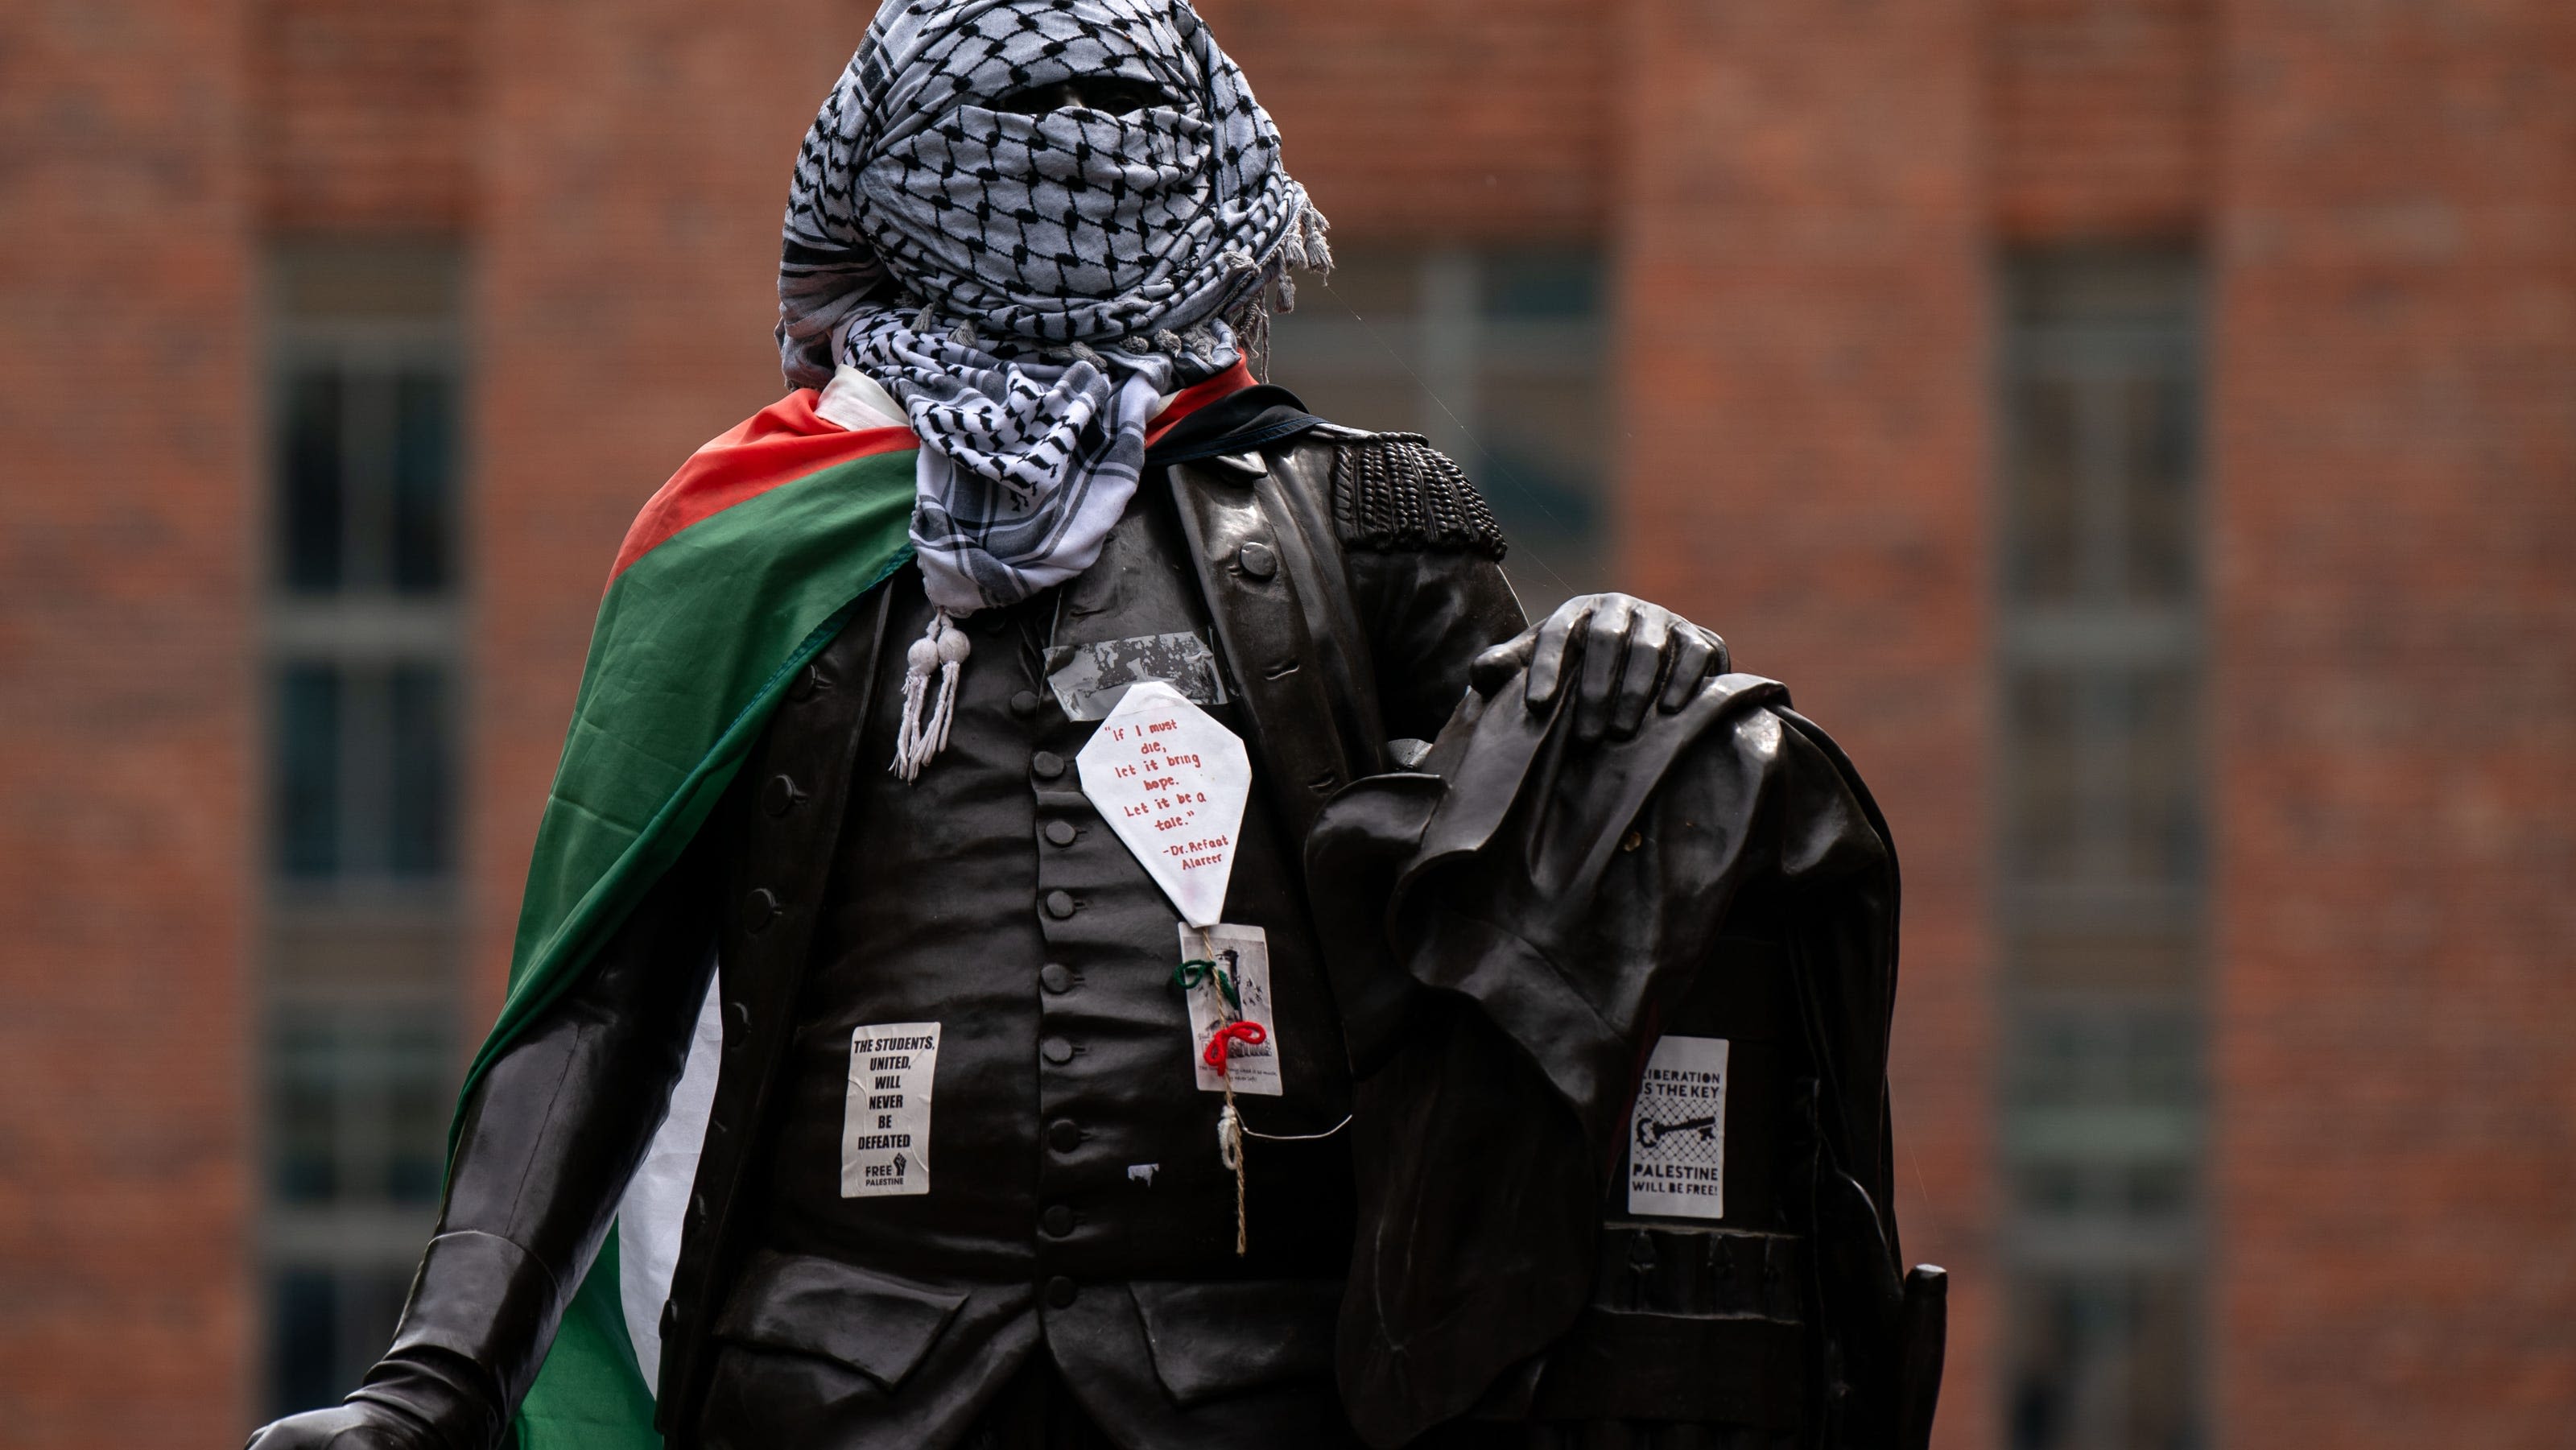 Washington, DC, police raid on GWU's pro-Palestinian tent camp ends in arrests, pepper spray